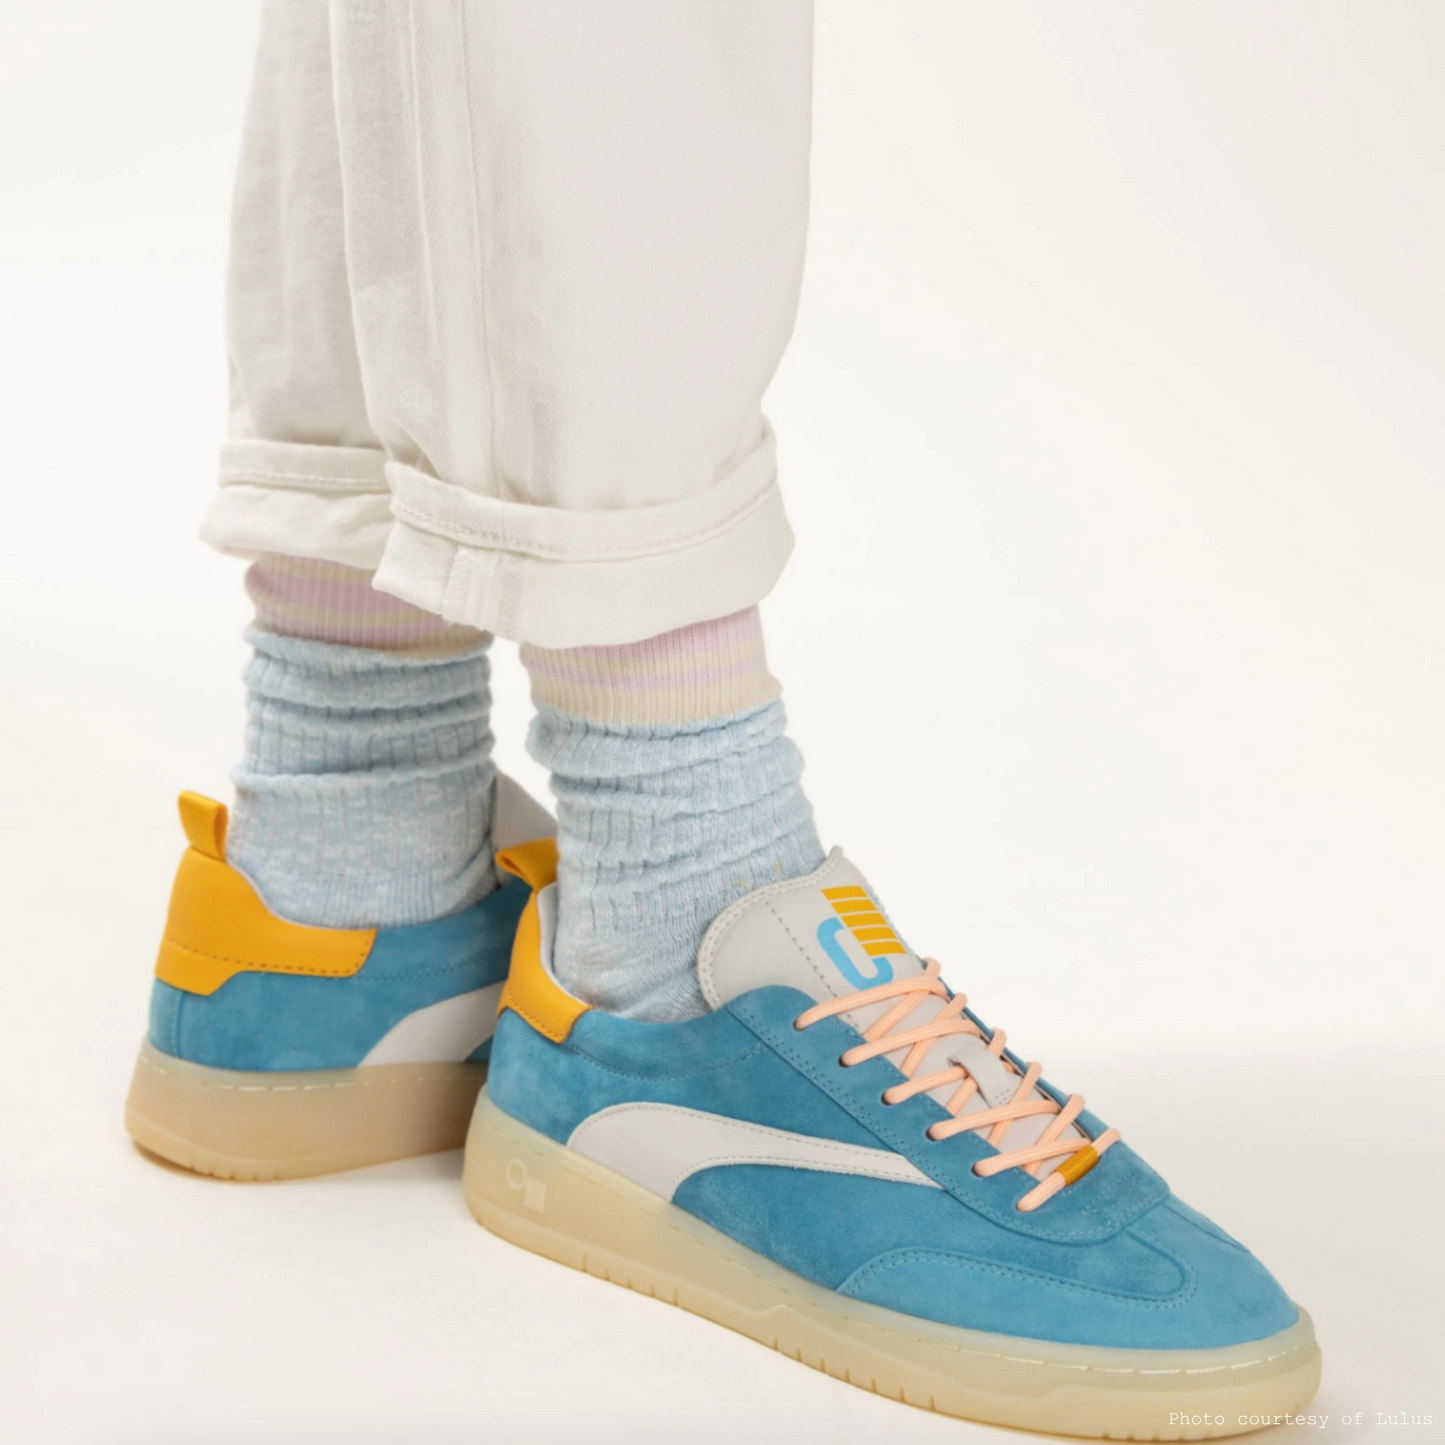 Oncept's Panama Sneaker in the color Adriatic Blue